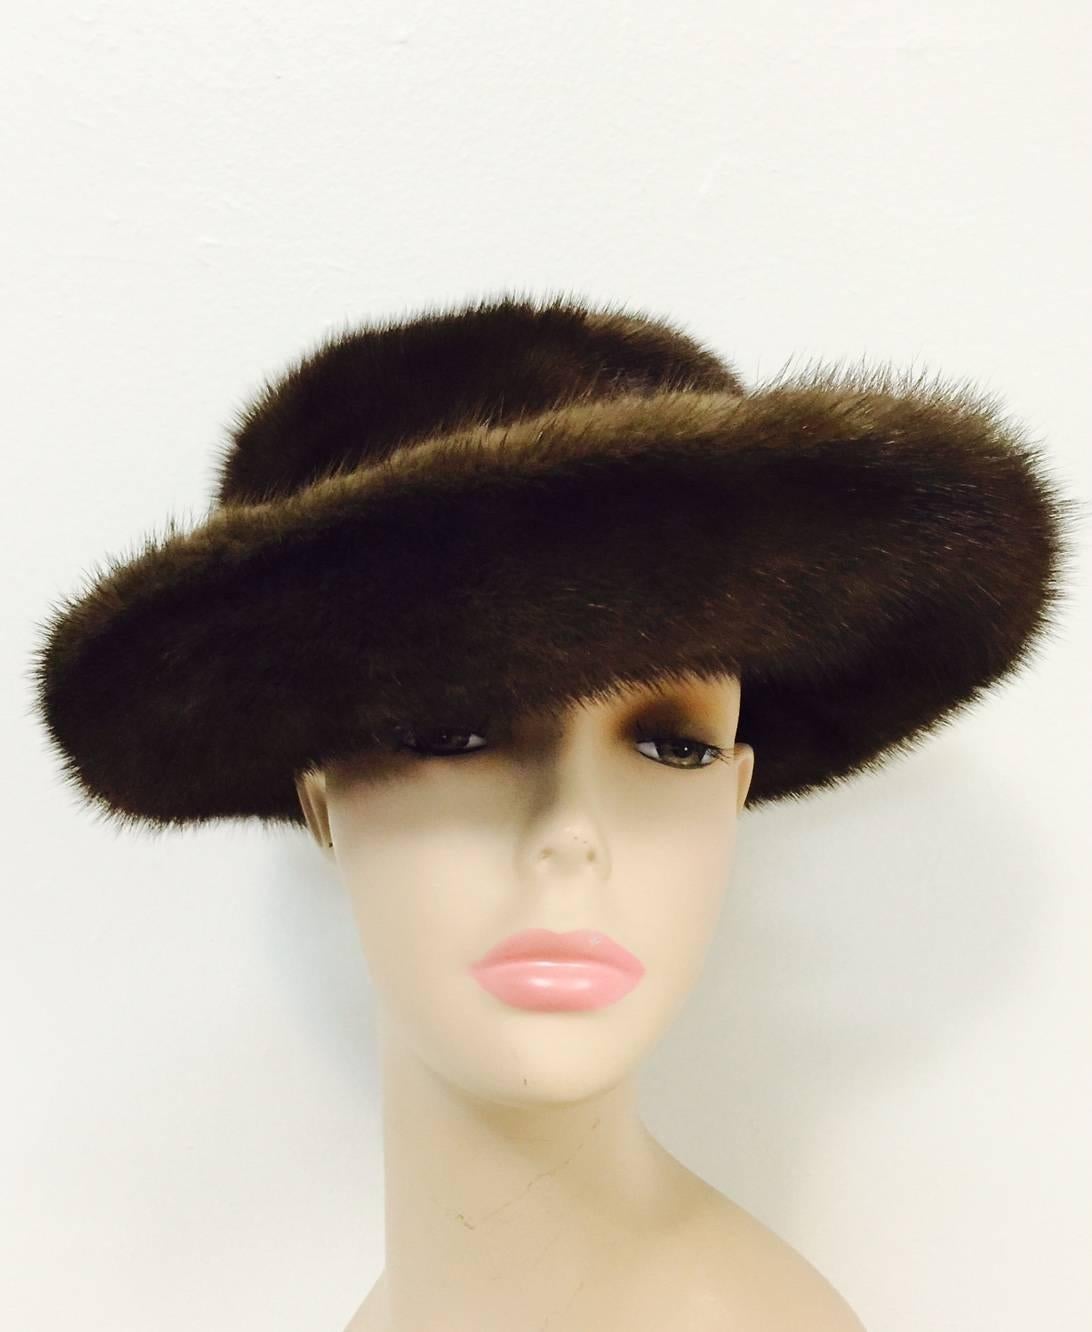 Lenore Marshall Hat is crafted from the most luxurious mink pelts available.  No wonder many of Hollywood's most celebrated actors have worn her designs in film, including Barbara Streisand!  Slightly offset, upturned brim is wider in the front and